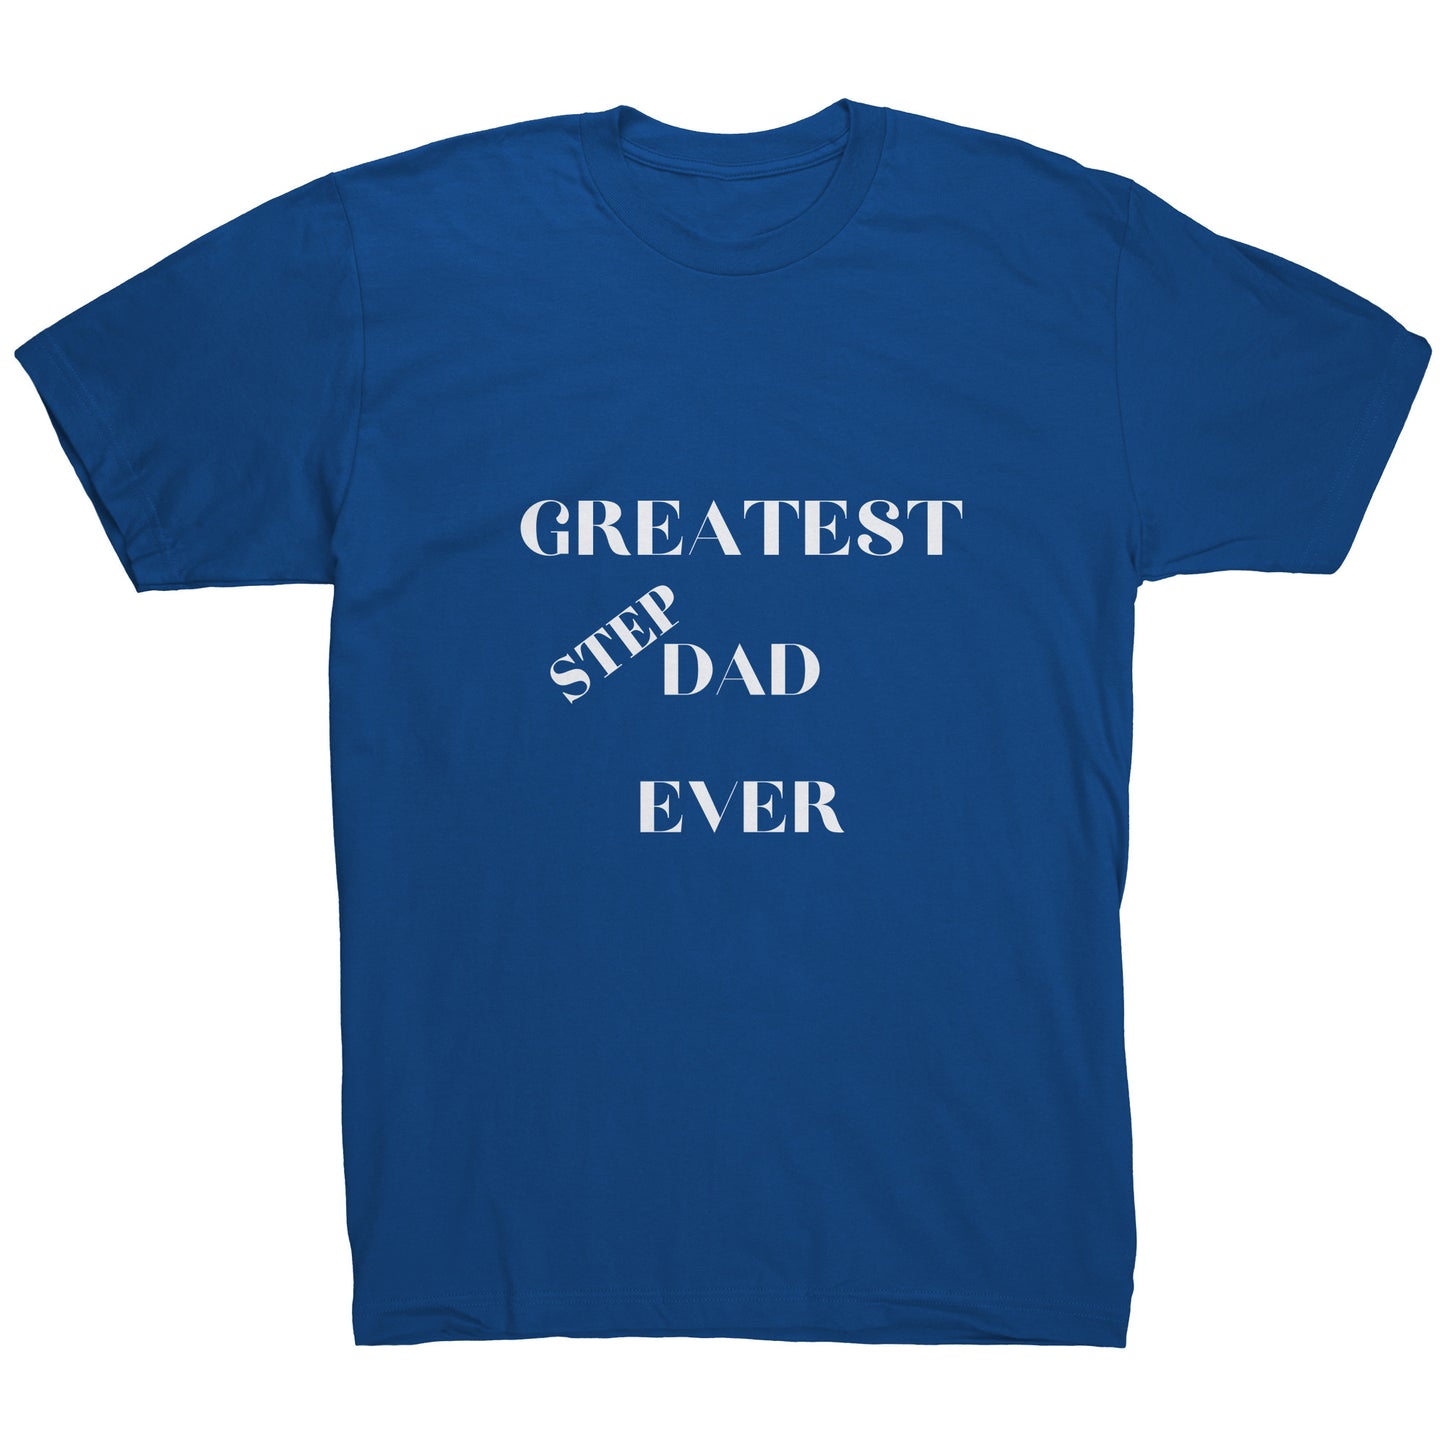 Father's Day "Greatest Step-Dad Ever' Shirt available in a variety of colors